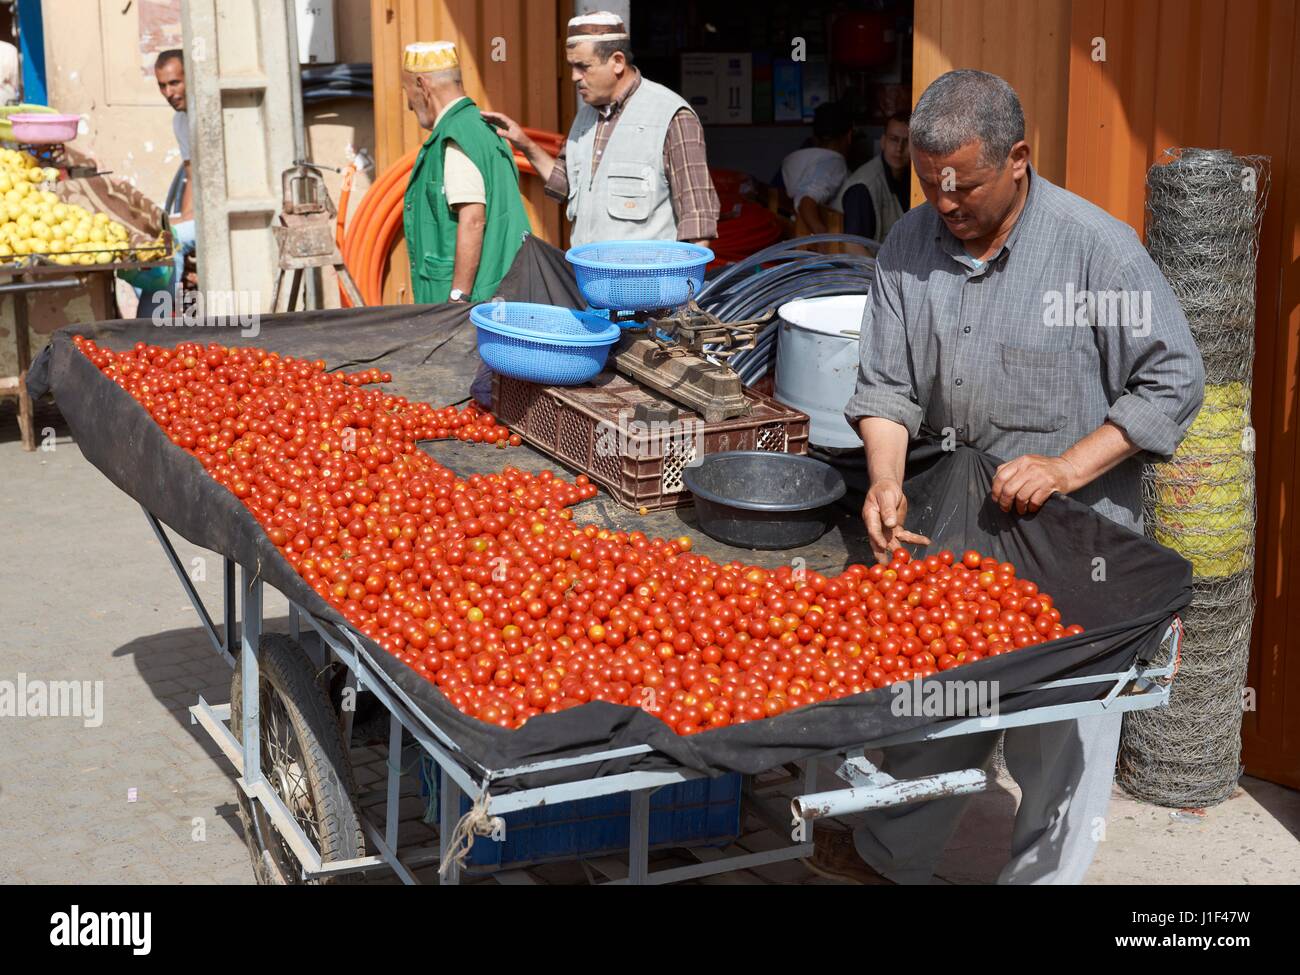 Man selling tomatoes from a hand cart in the ancient town of Taroudant in Morocco. Stock Photo